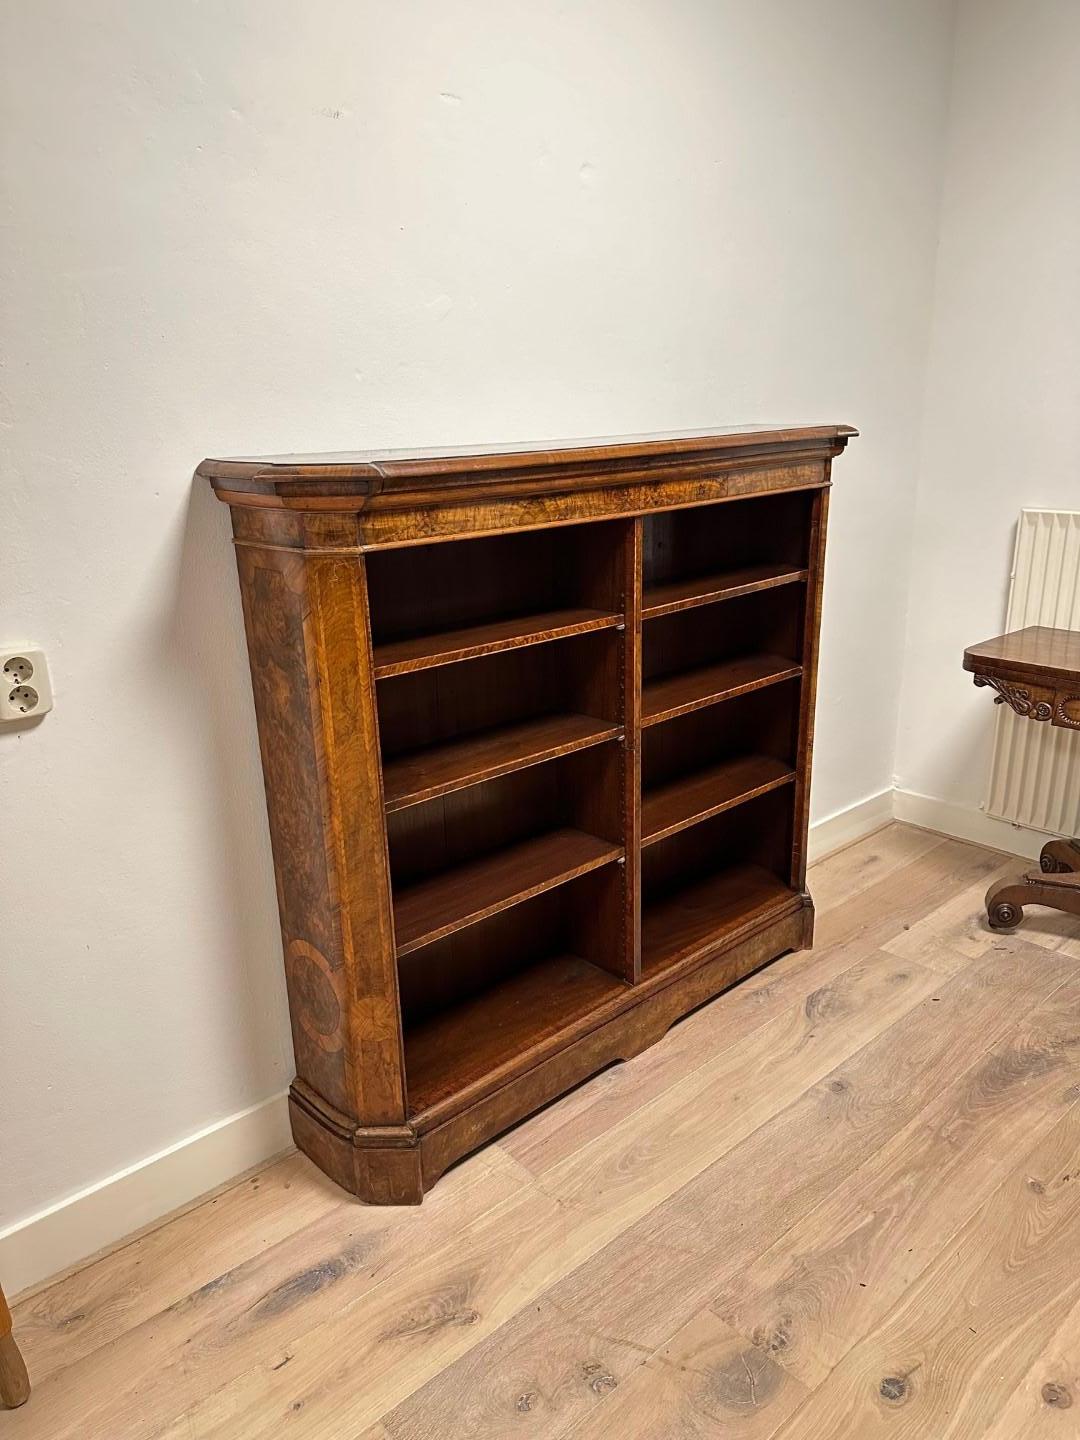 Beautiful open bookcase in burl walnut. The sides are slightly curved and inlaid. Beautiful warm color. The cabinet has a total of 6 adjustable shelves. Originally the cupboard  had doors.

Origin: England
Period: Approx. 1850
Size: 144cm x d.30cm x